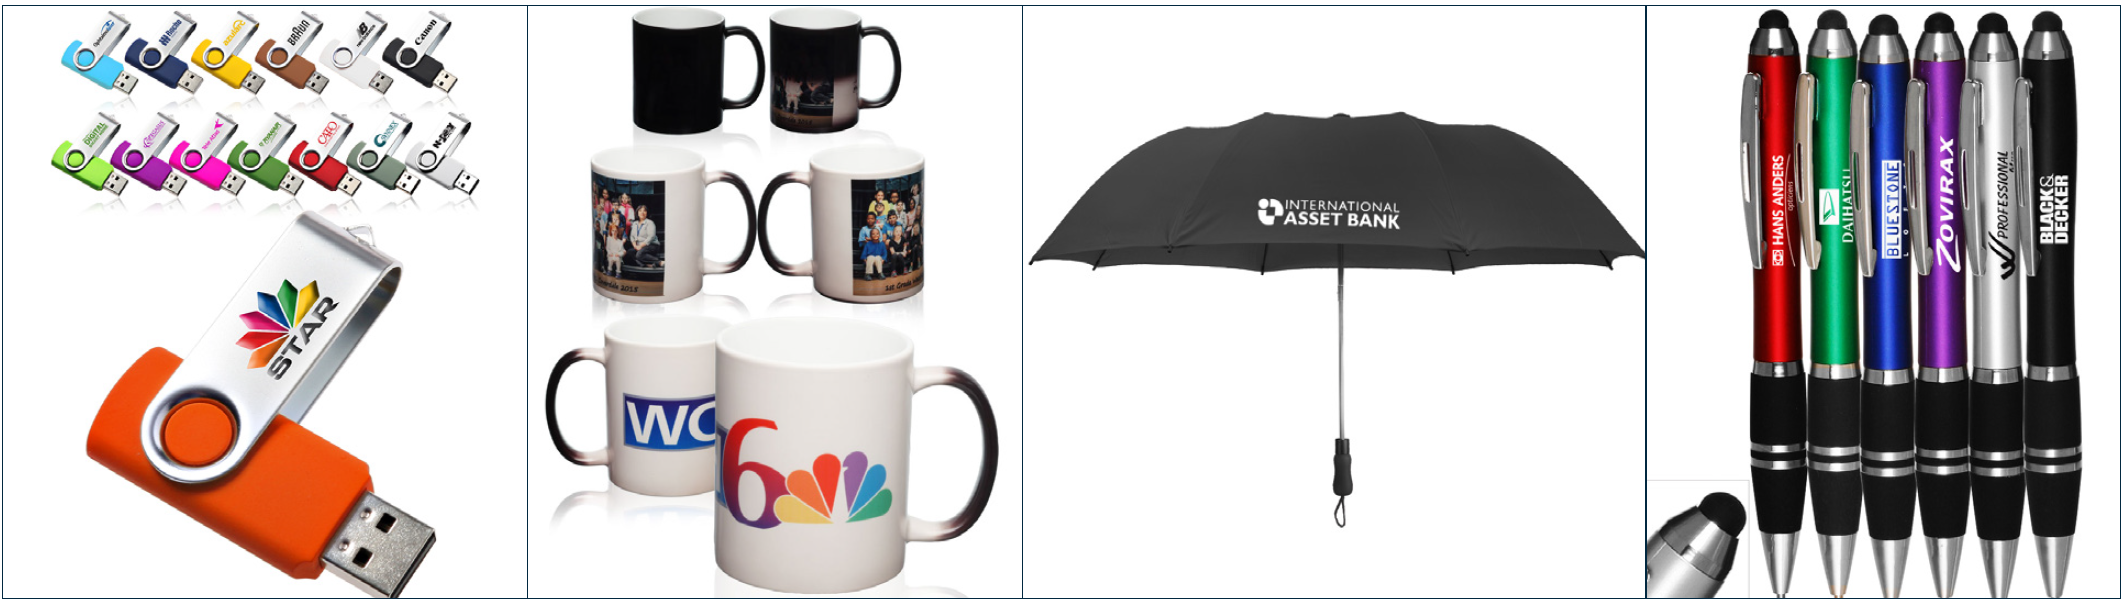 New York Promotional Products Company